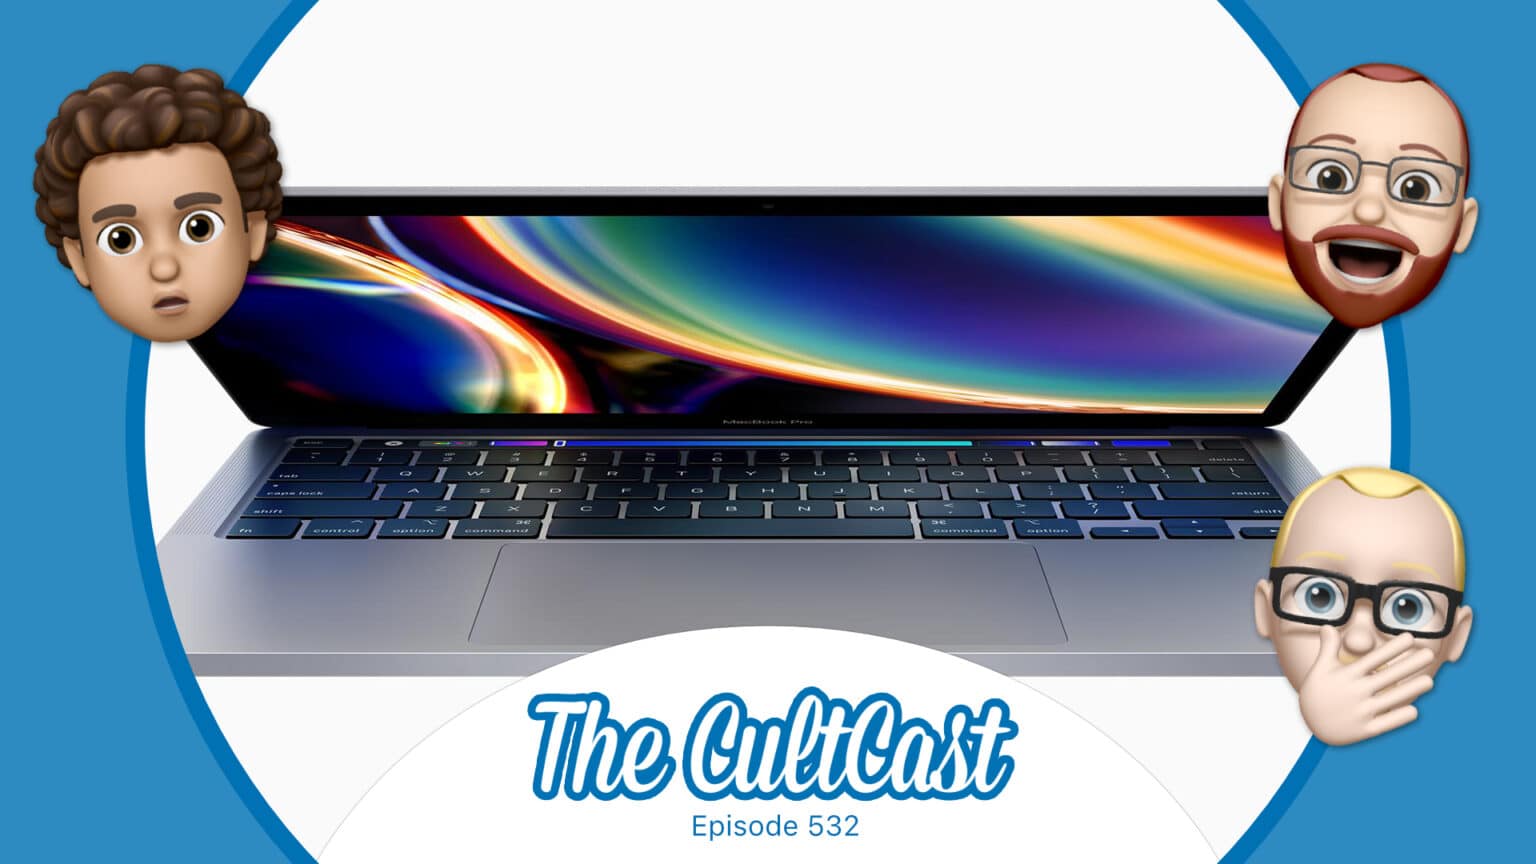 The CultCast: We thought the Touch Bar was going the way of the dodo, but maybe not.